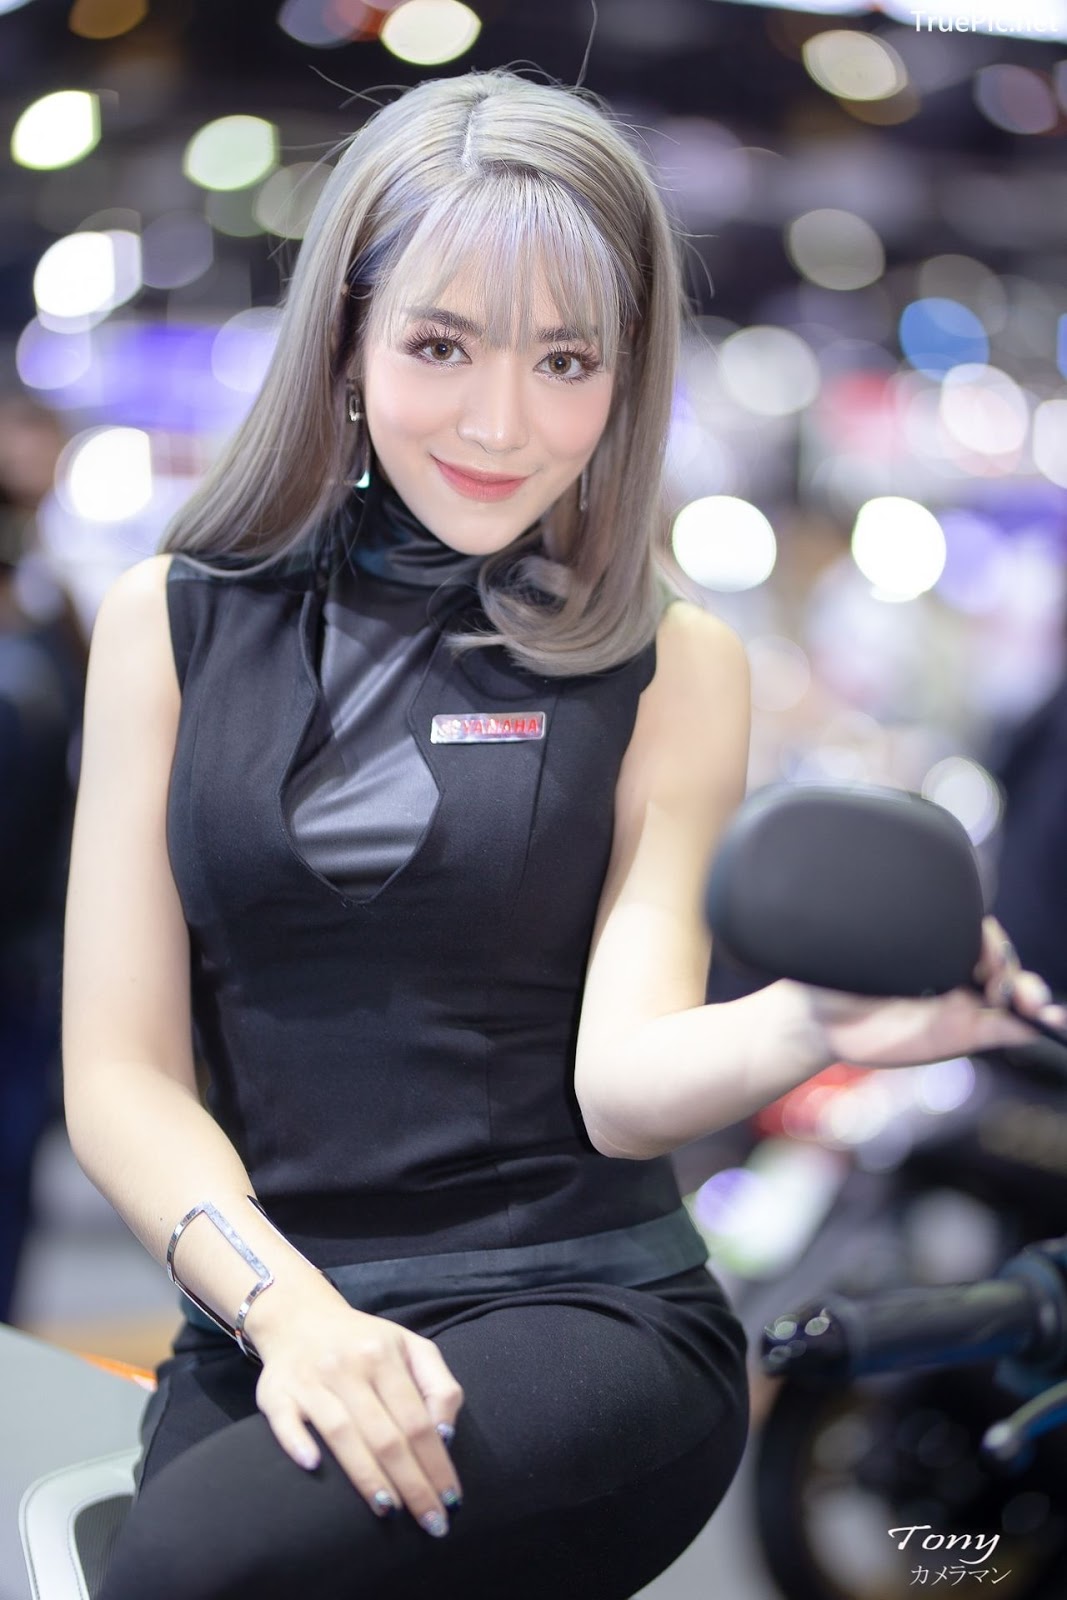 Image-Thailand-Hot-Model-Thai-Racing-Girl-At-Motor-Expo-2019-TruePic.net- Picture-79